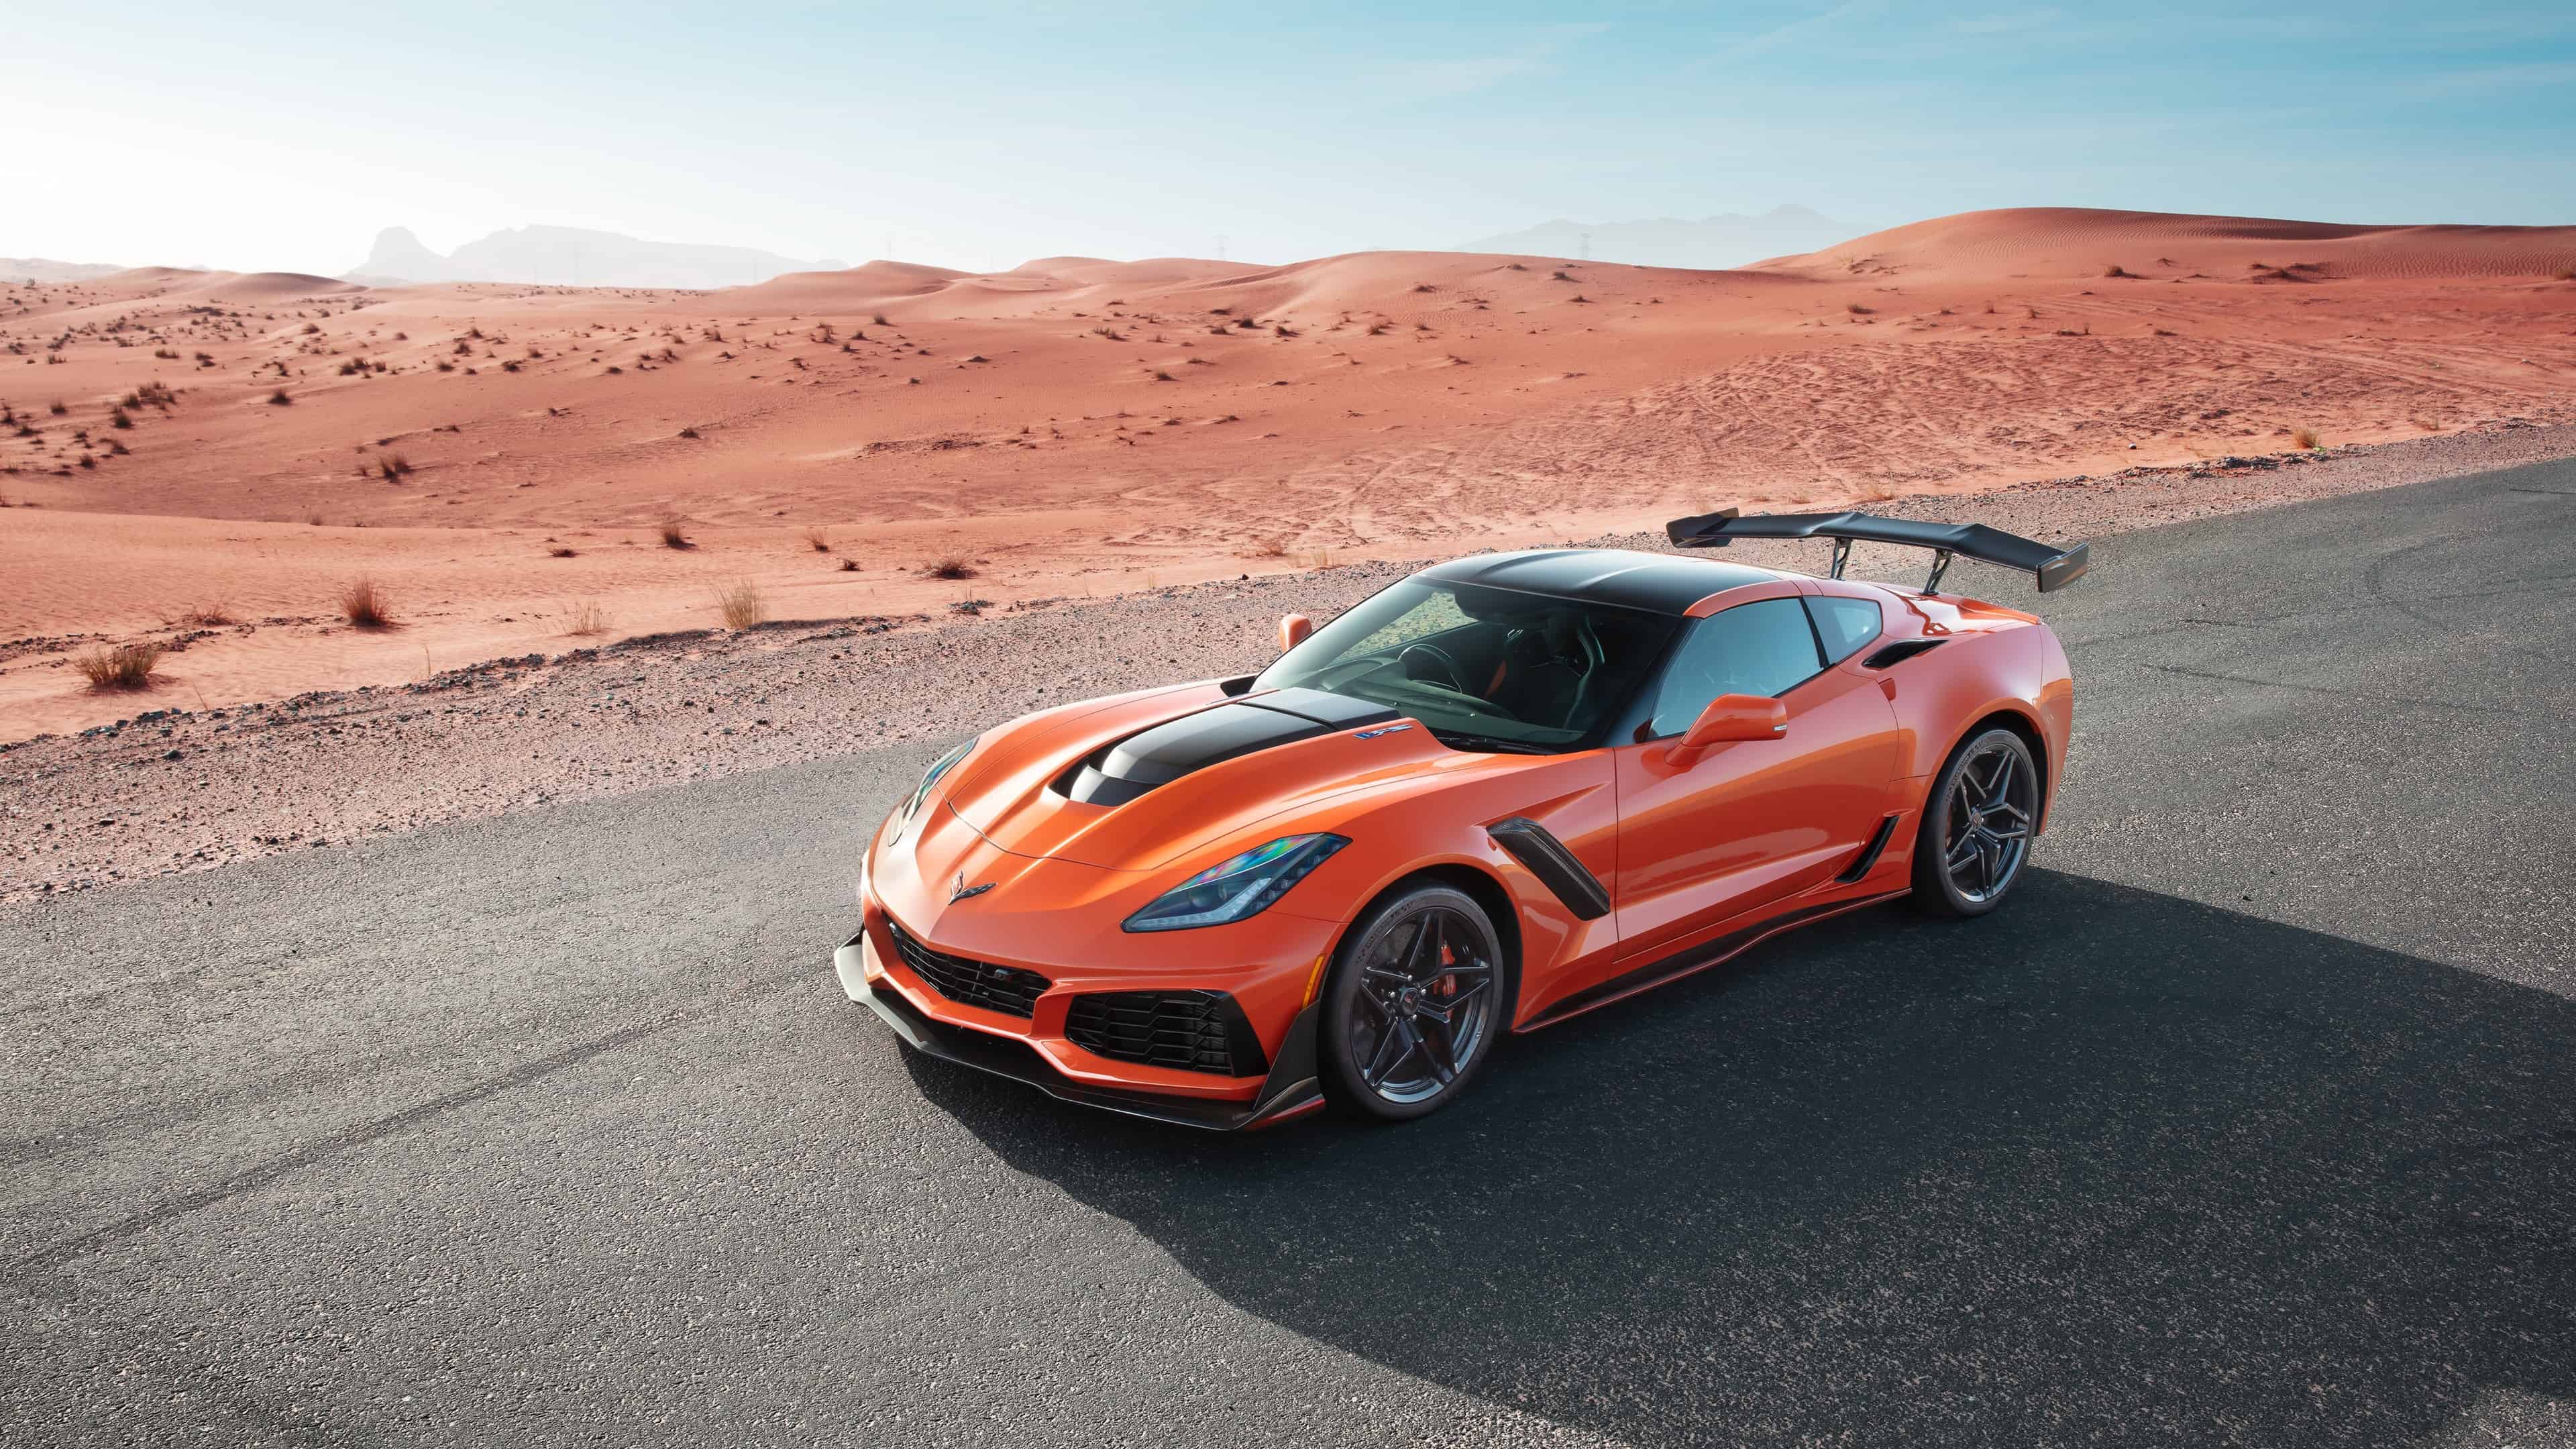 15 Incomparable 4k desktop wallpaper corvette You Can Use It Without A ...